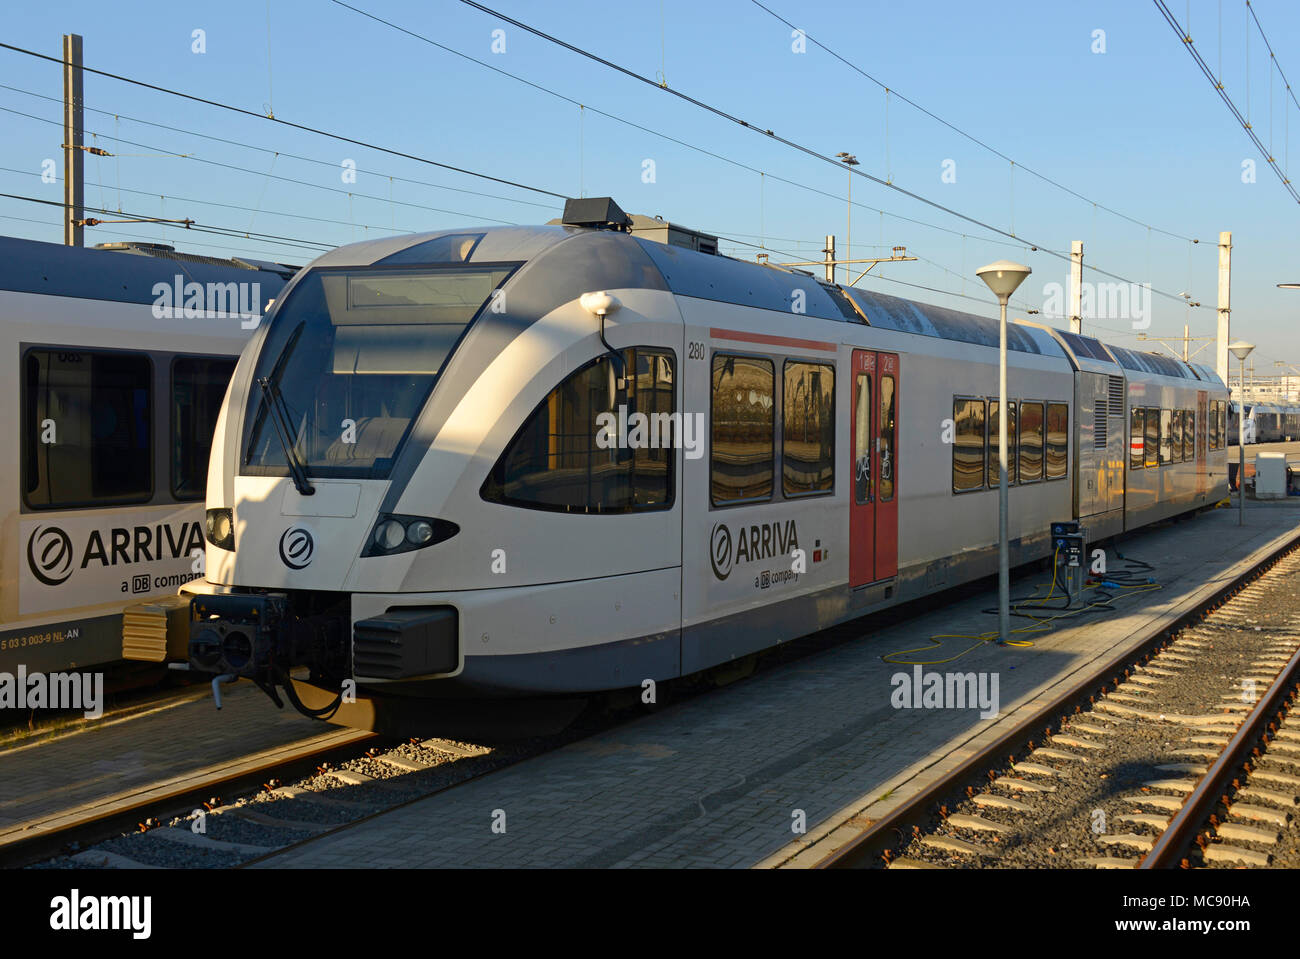 A modern electric multiple unit train parked ready for use at Venlo station in the Netherlands Stock Photo